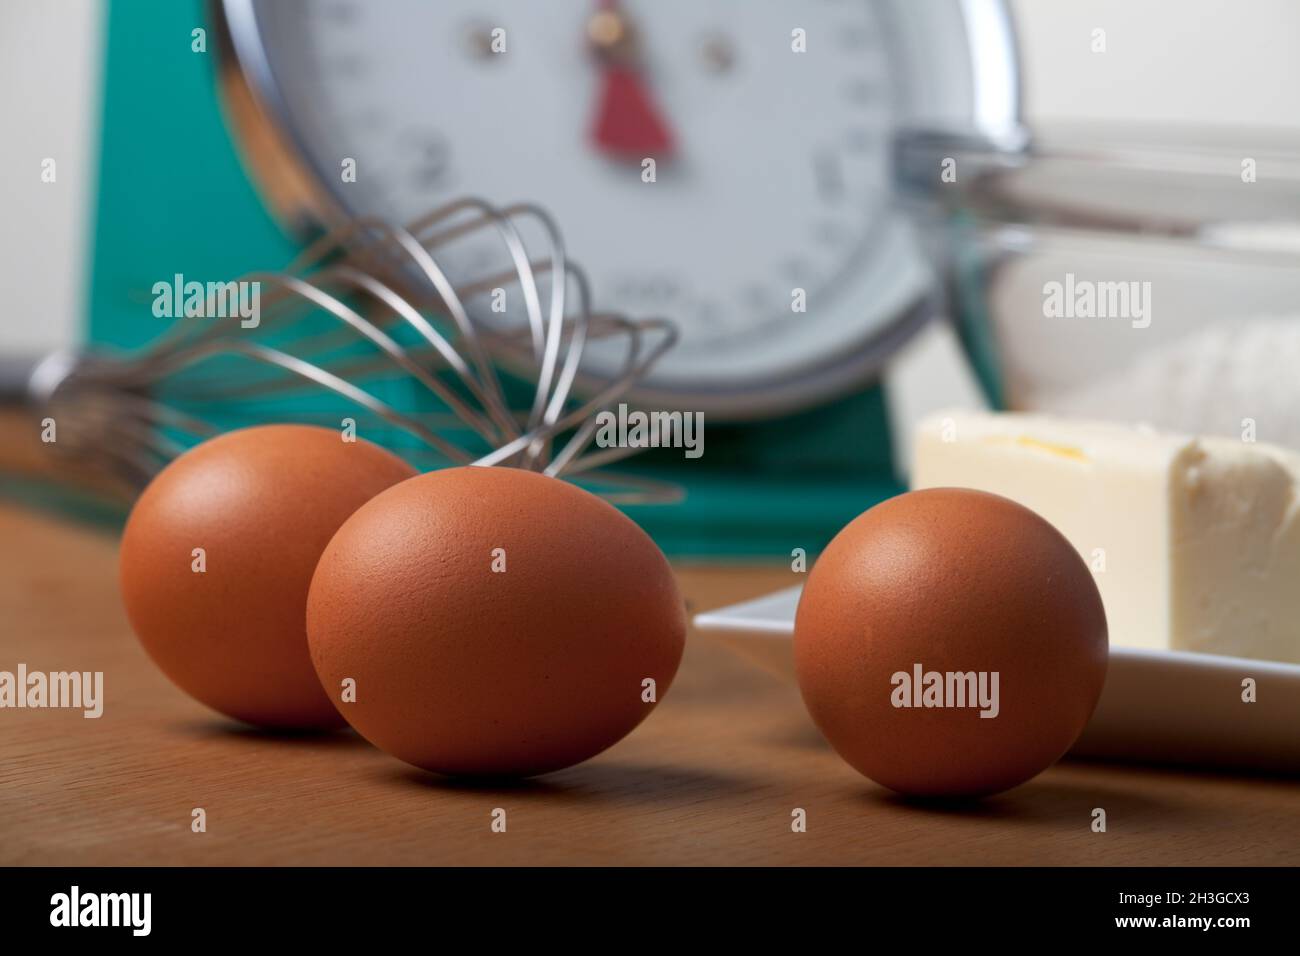 Eggs and a whisk on a wooden table Stock Photo